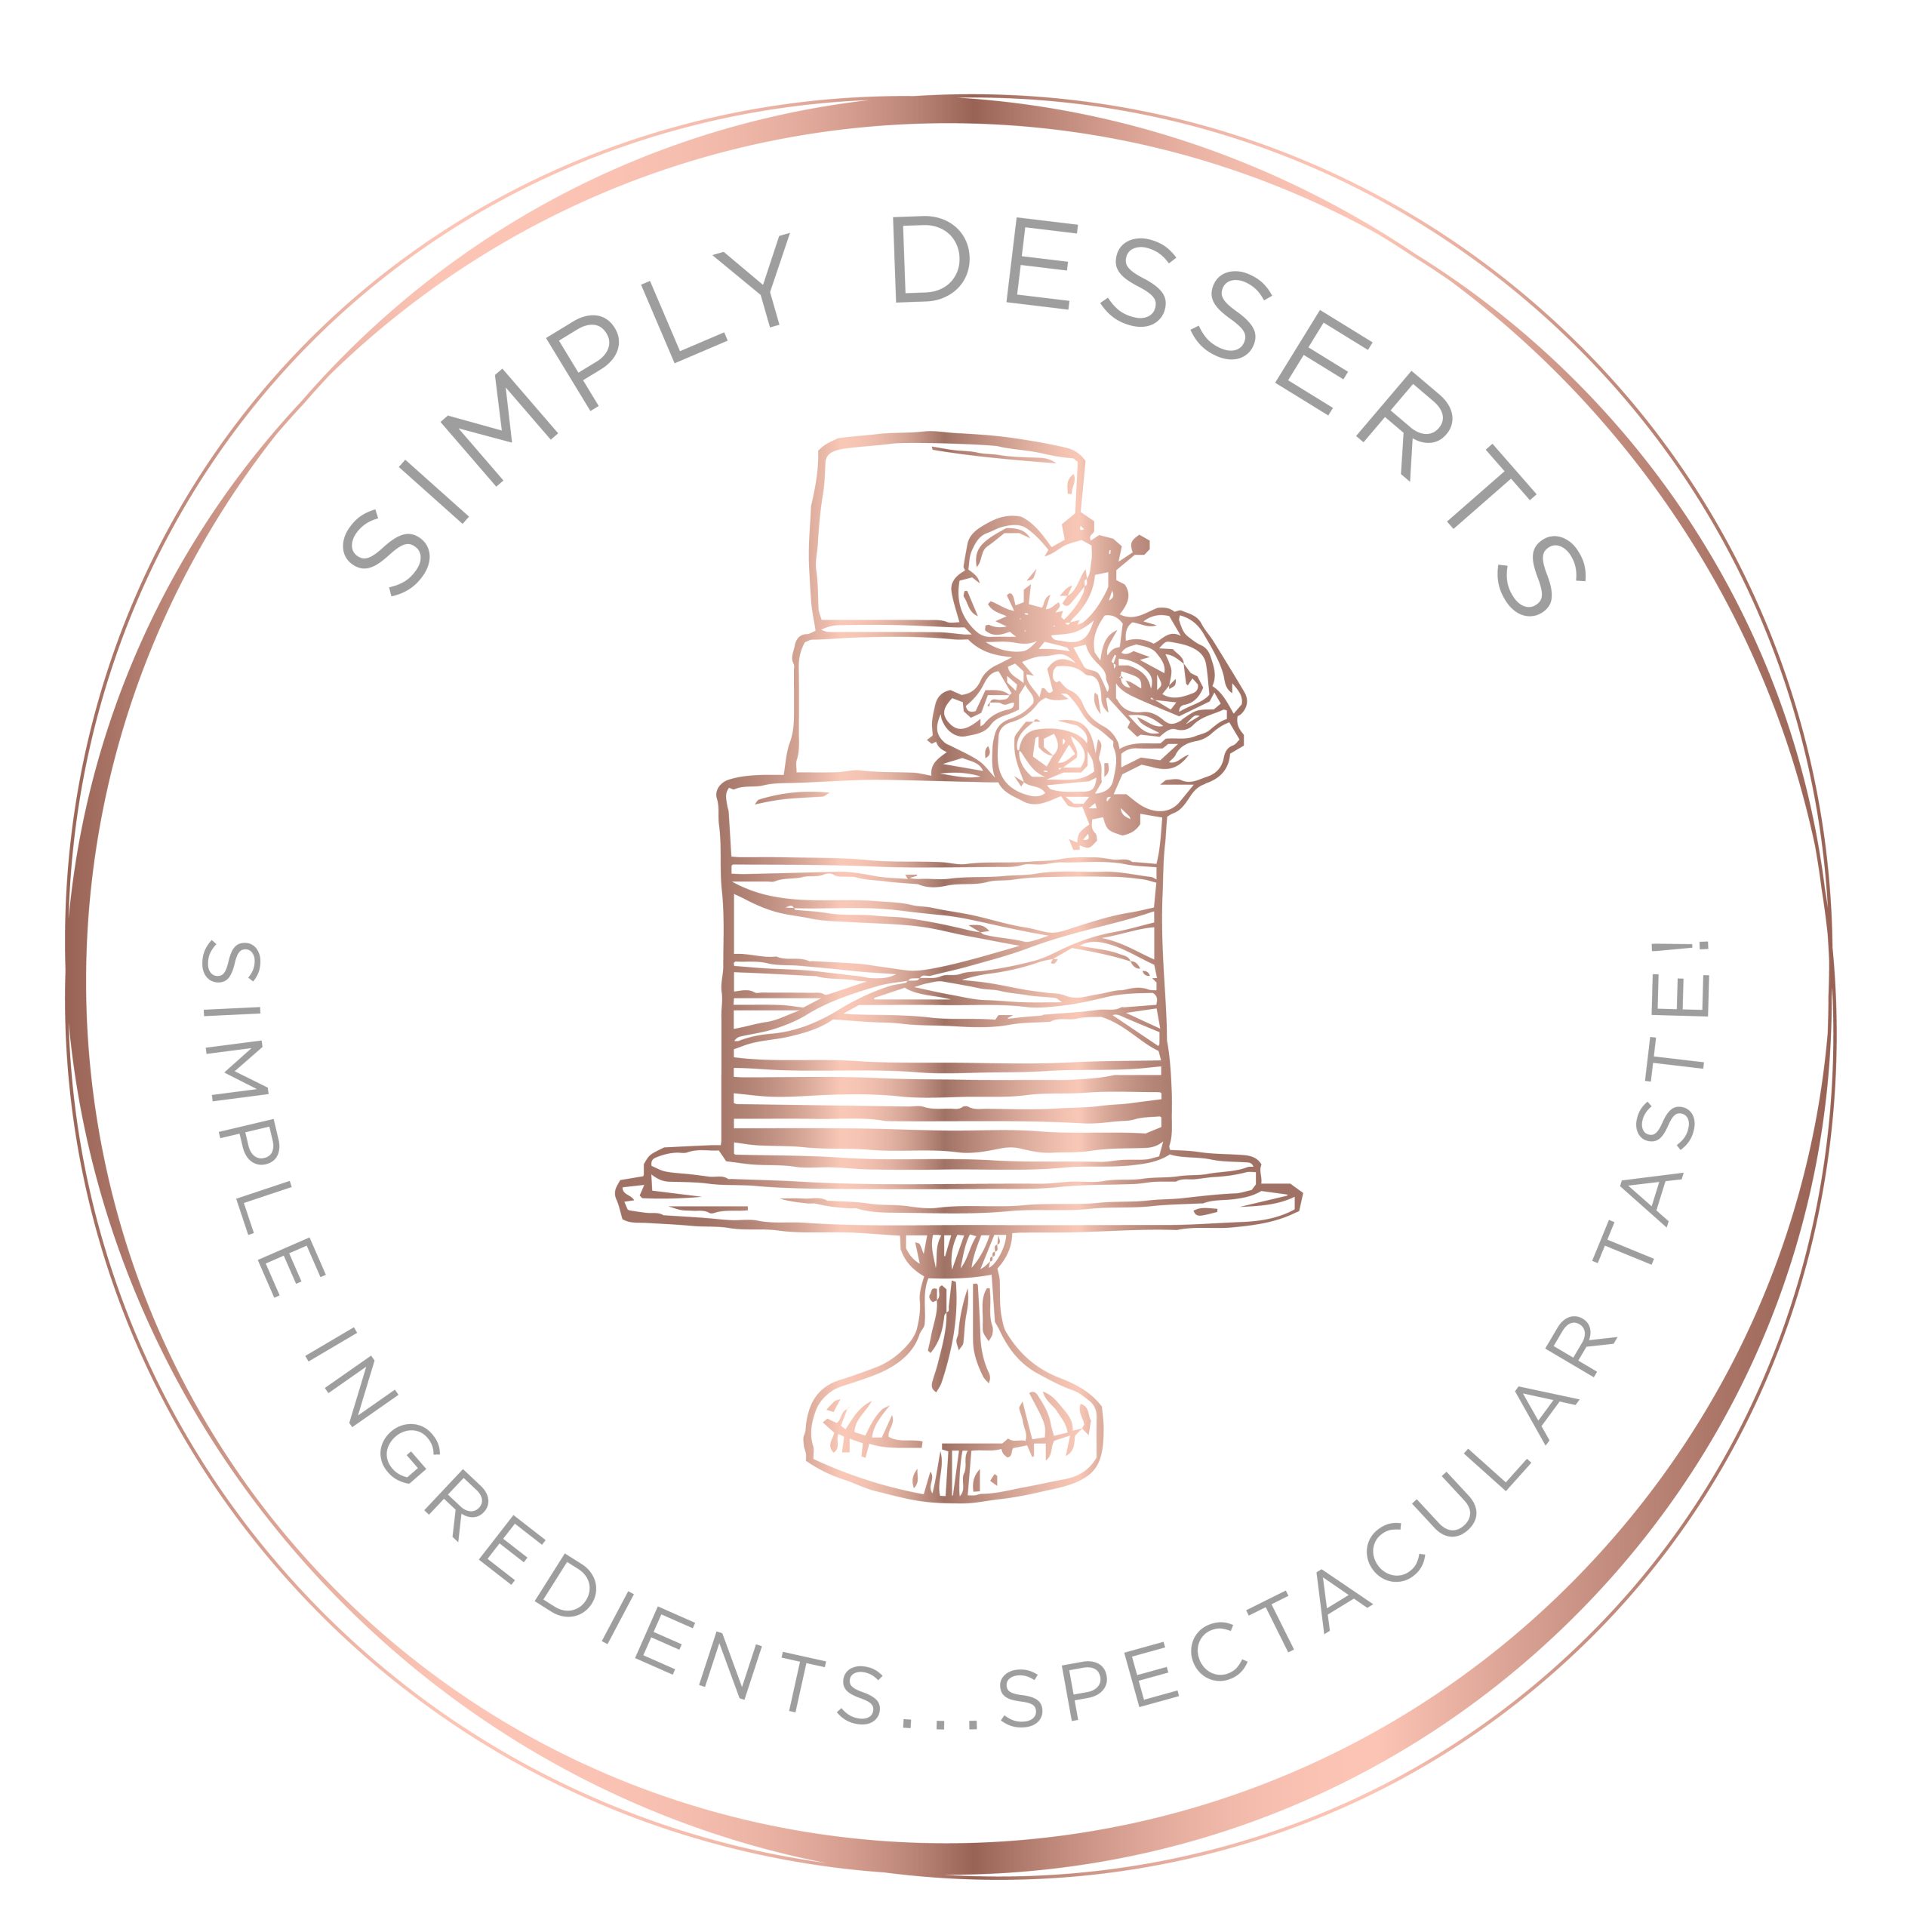 Simply Deserts